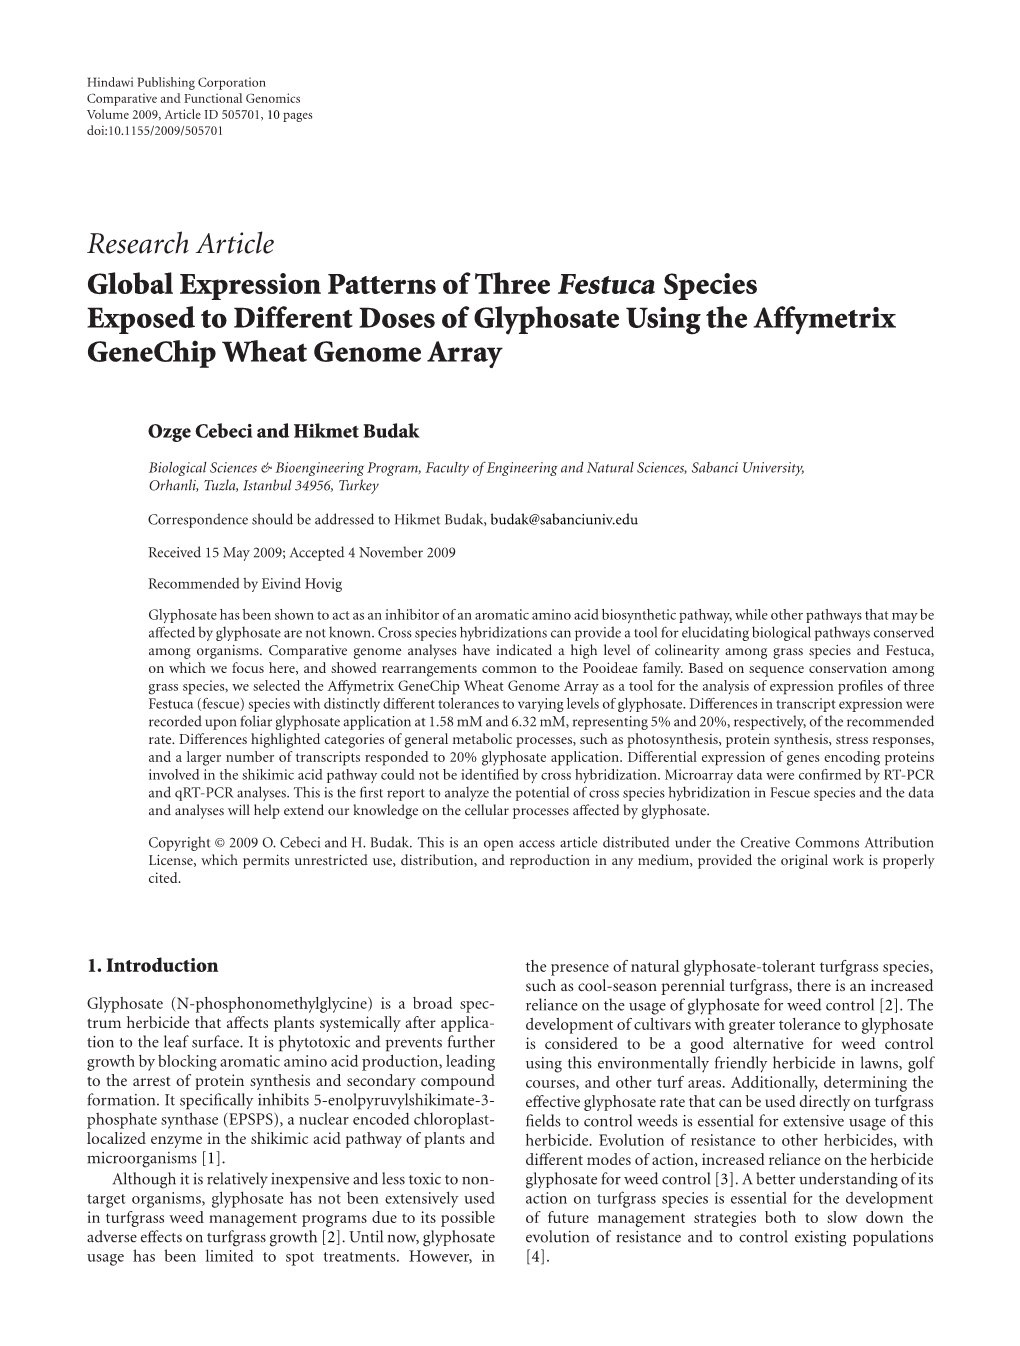 Global Expression Patterns of Three Festuca Species Exposed to Different Doses of Glyphosate Using the Affymetrix Genechip Wheat Genome Array